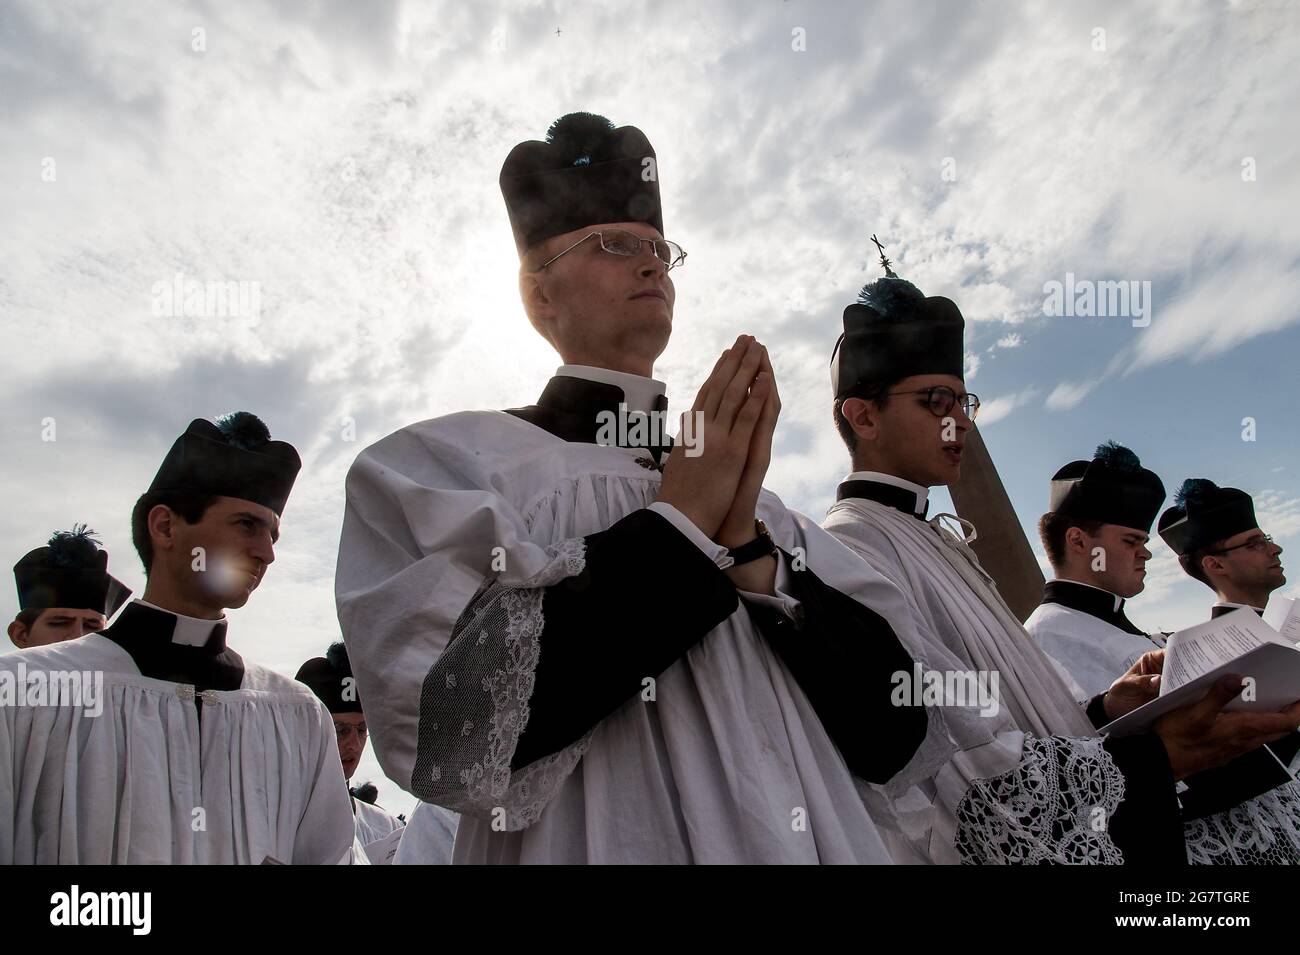 Rome, Italy. 16th Sep, 2017. September 16, 2017 : Priests pray the salm as they arrive at St. Peter's Basilica to attend at the Mass in the ancient rite in occasion of the tenth anniversary of the motu proprio of Papa Benedetto XVI 'Summorum Pontificum' at the Vatican. Credit: Independent Photo Agency/Alamy Live News Stock Photo